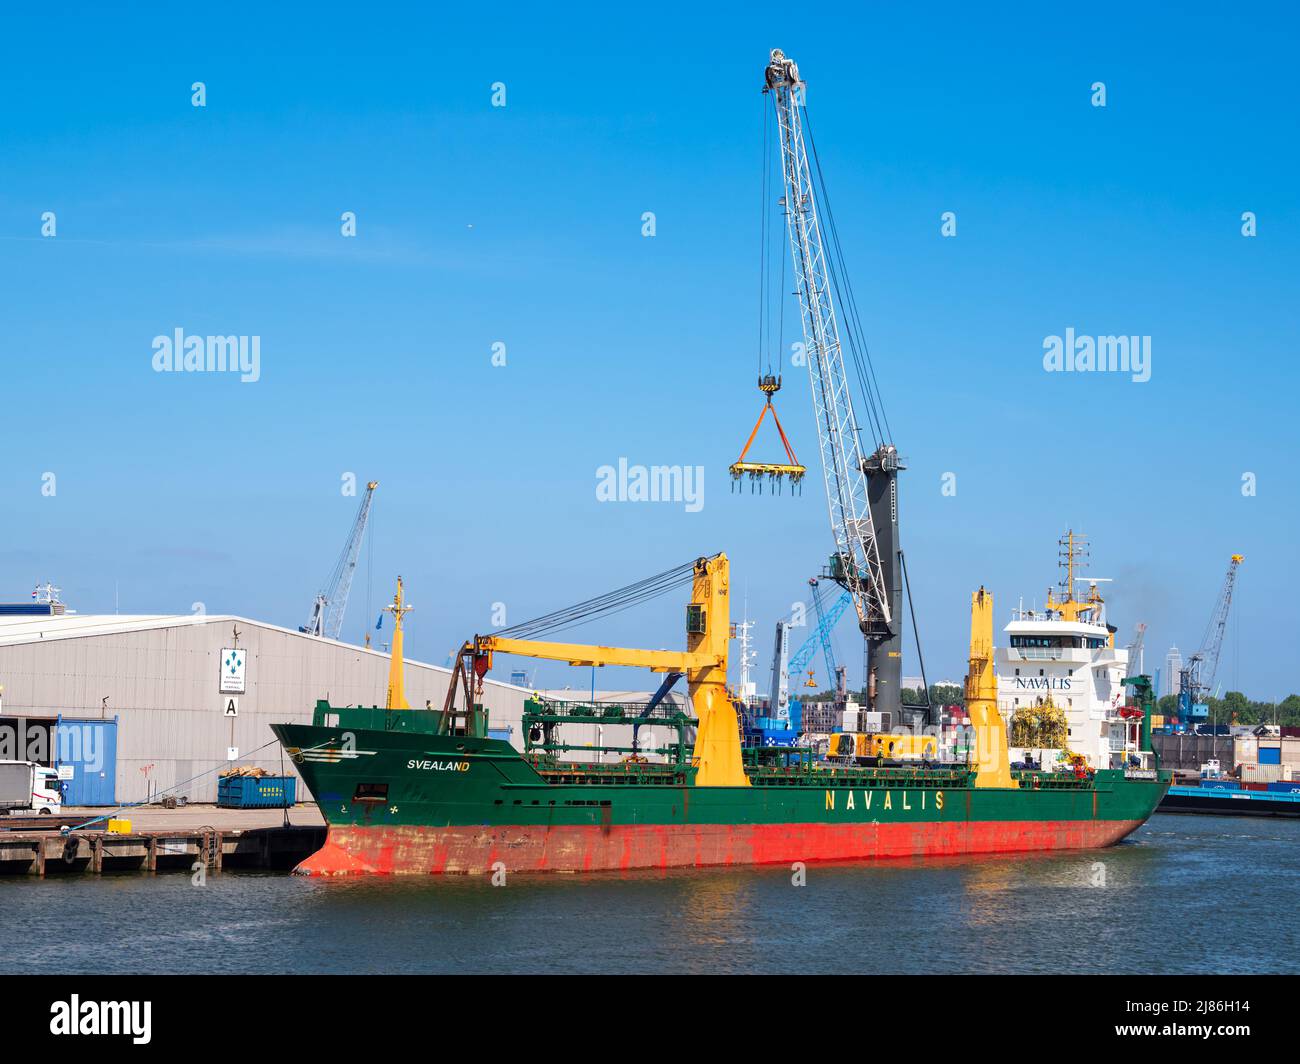 Rotterdam, Netherlands - April 28, 2022: Ship Navalis in the Industrial port of Rotterdam. Navalis Shipping is a shipbroker and break bulk operator. Stock Photo